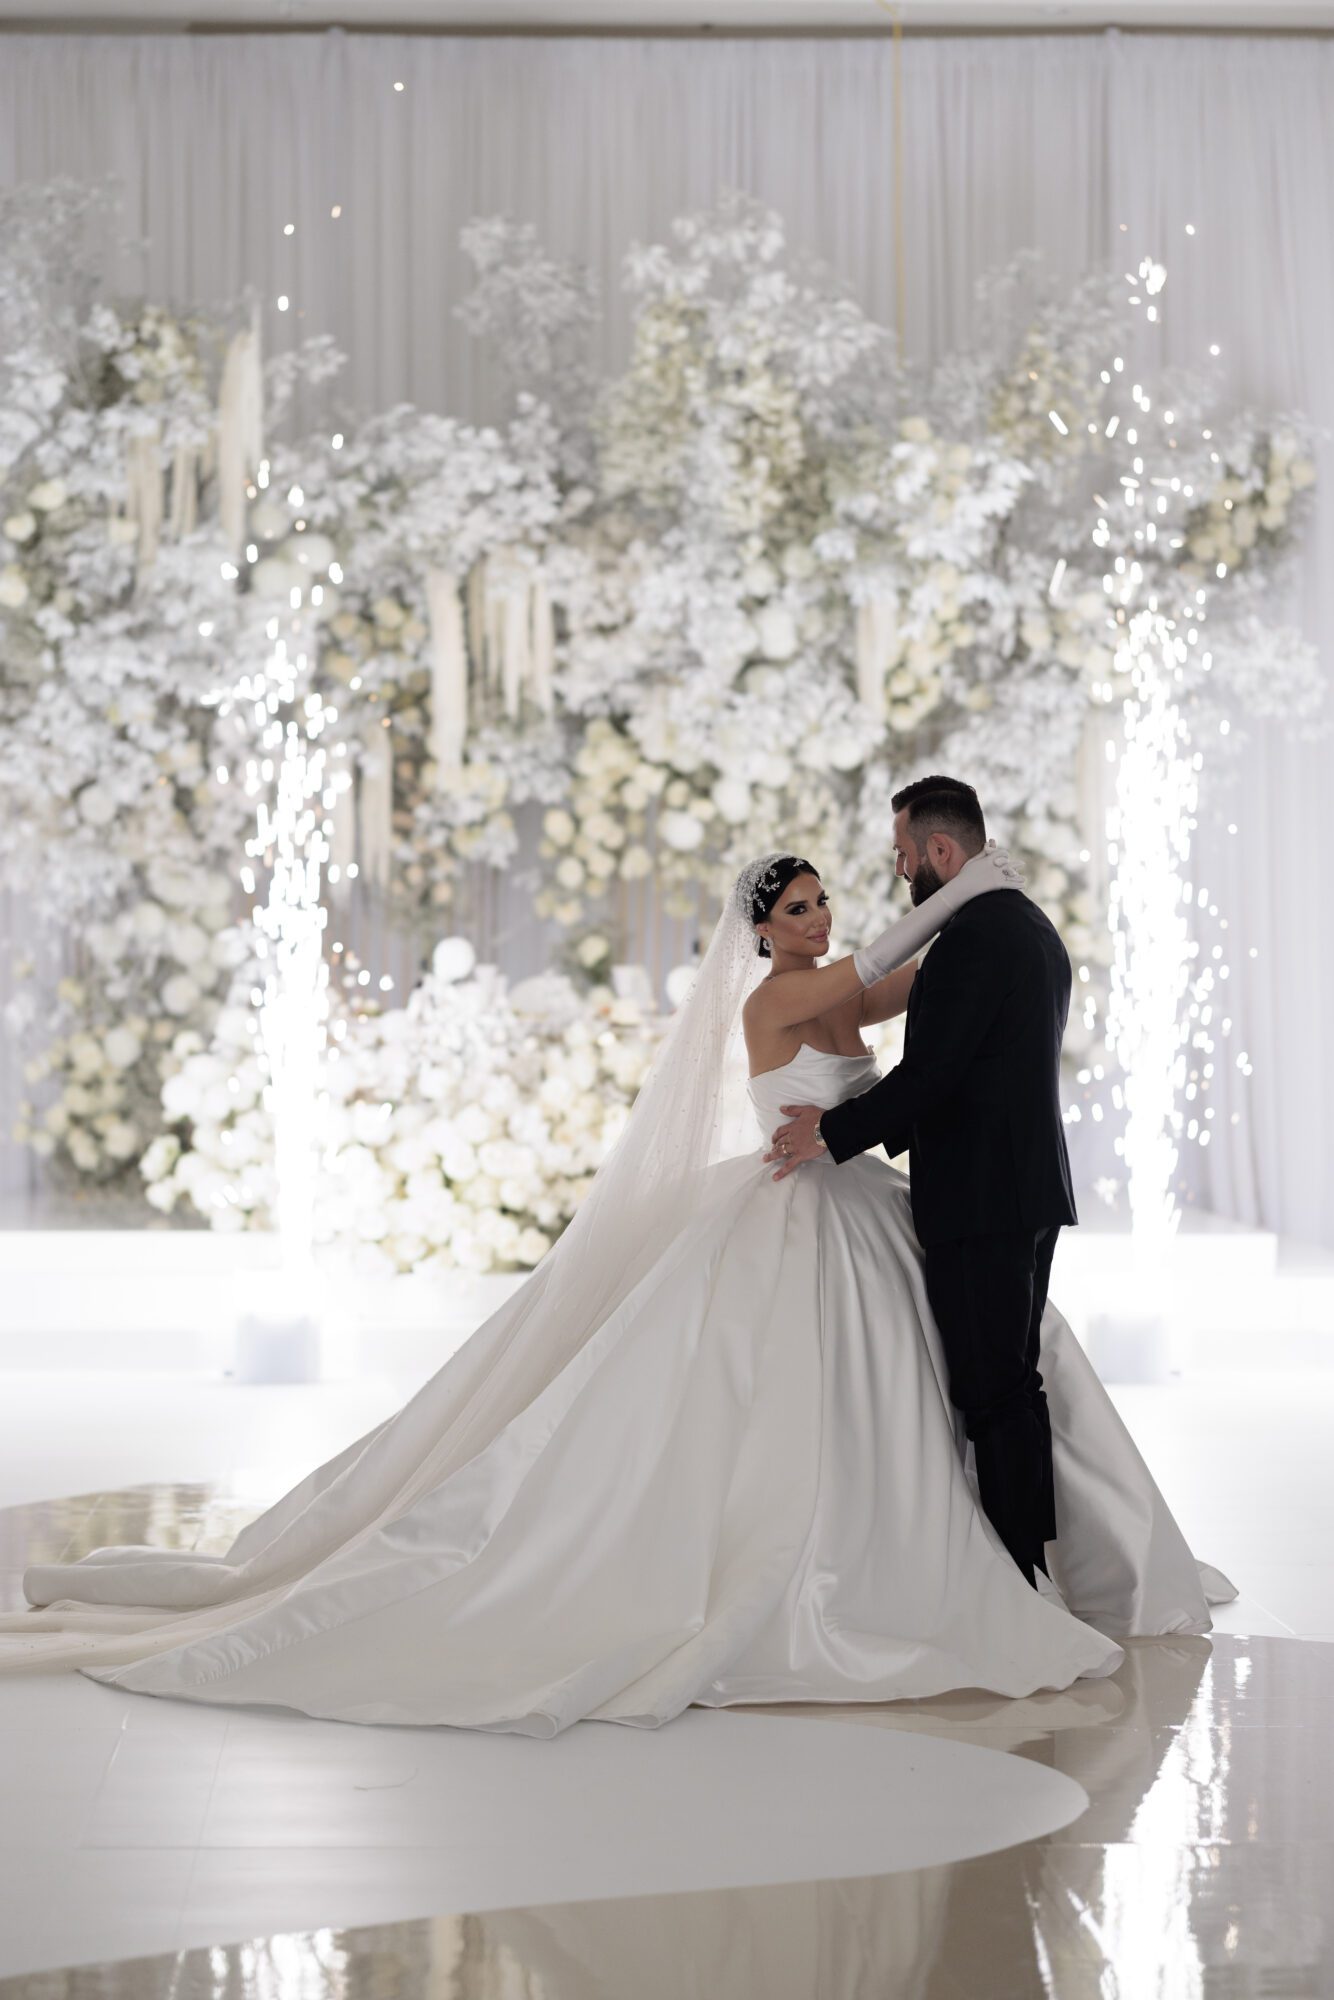 A bride in a flowing white gown and a groom in a black suit share a tender moment in a lavish wedding hall adorned with luxury white flowers and twinkling lights.